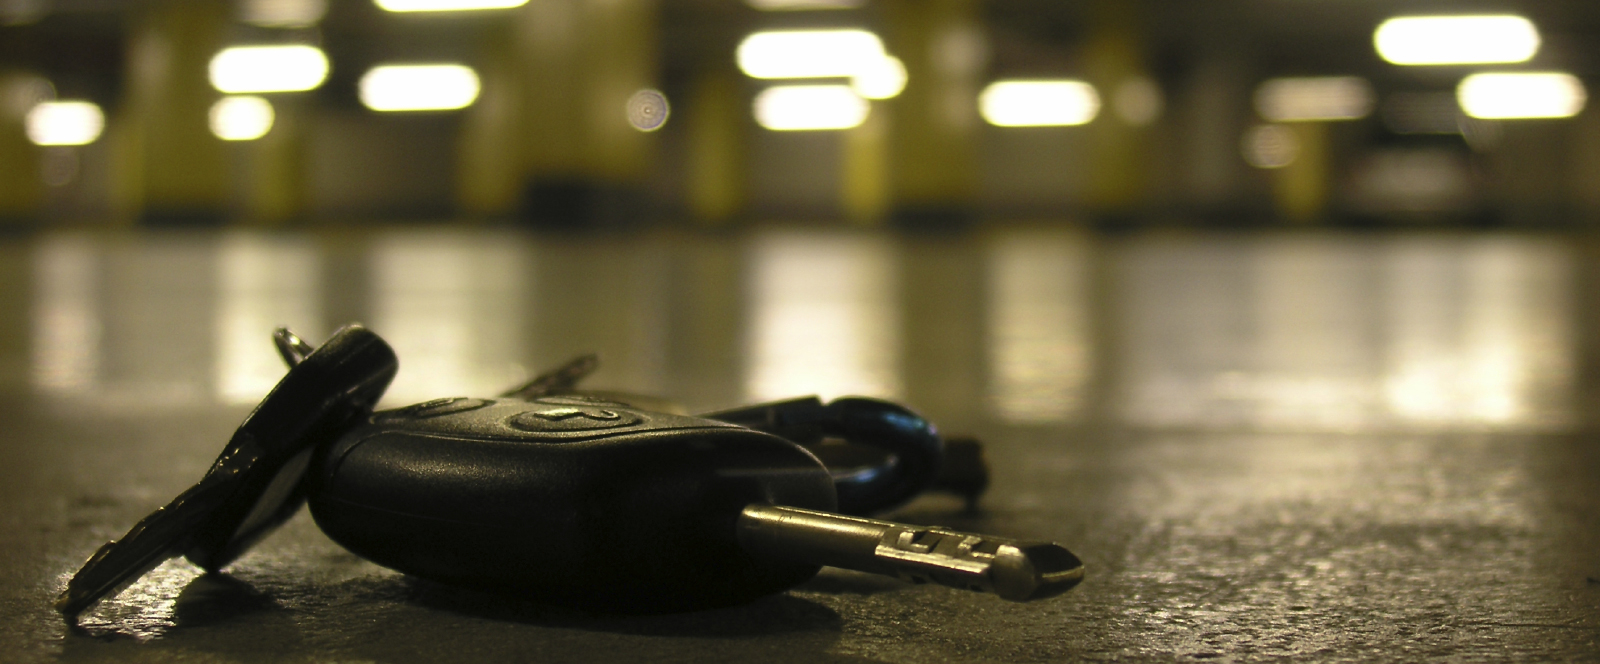 How To Choose The Best Vendor For The Lost Car Keys In Sutton?